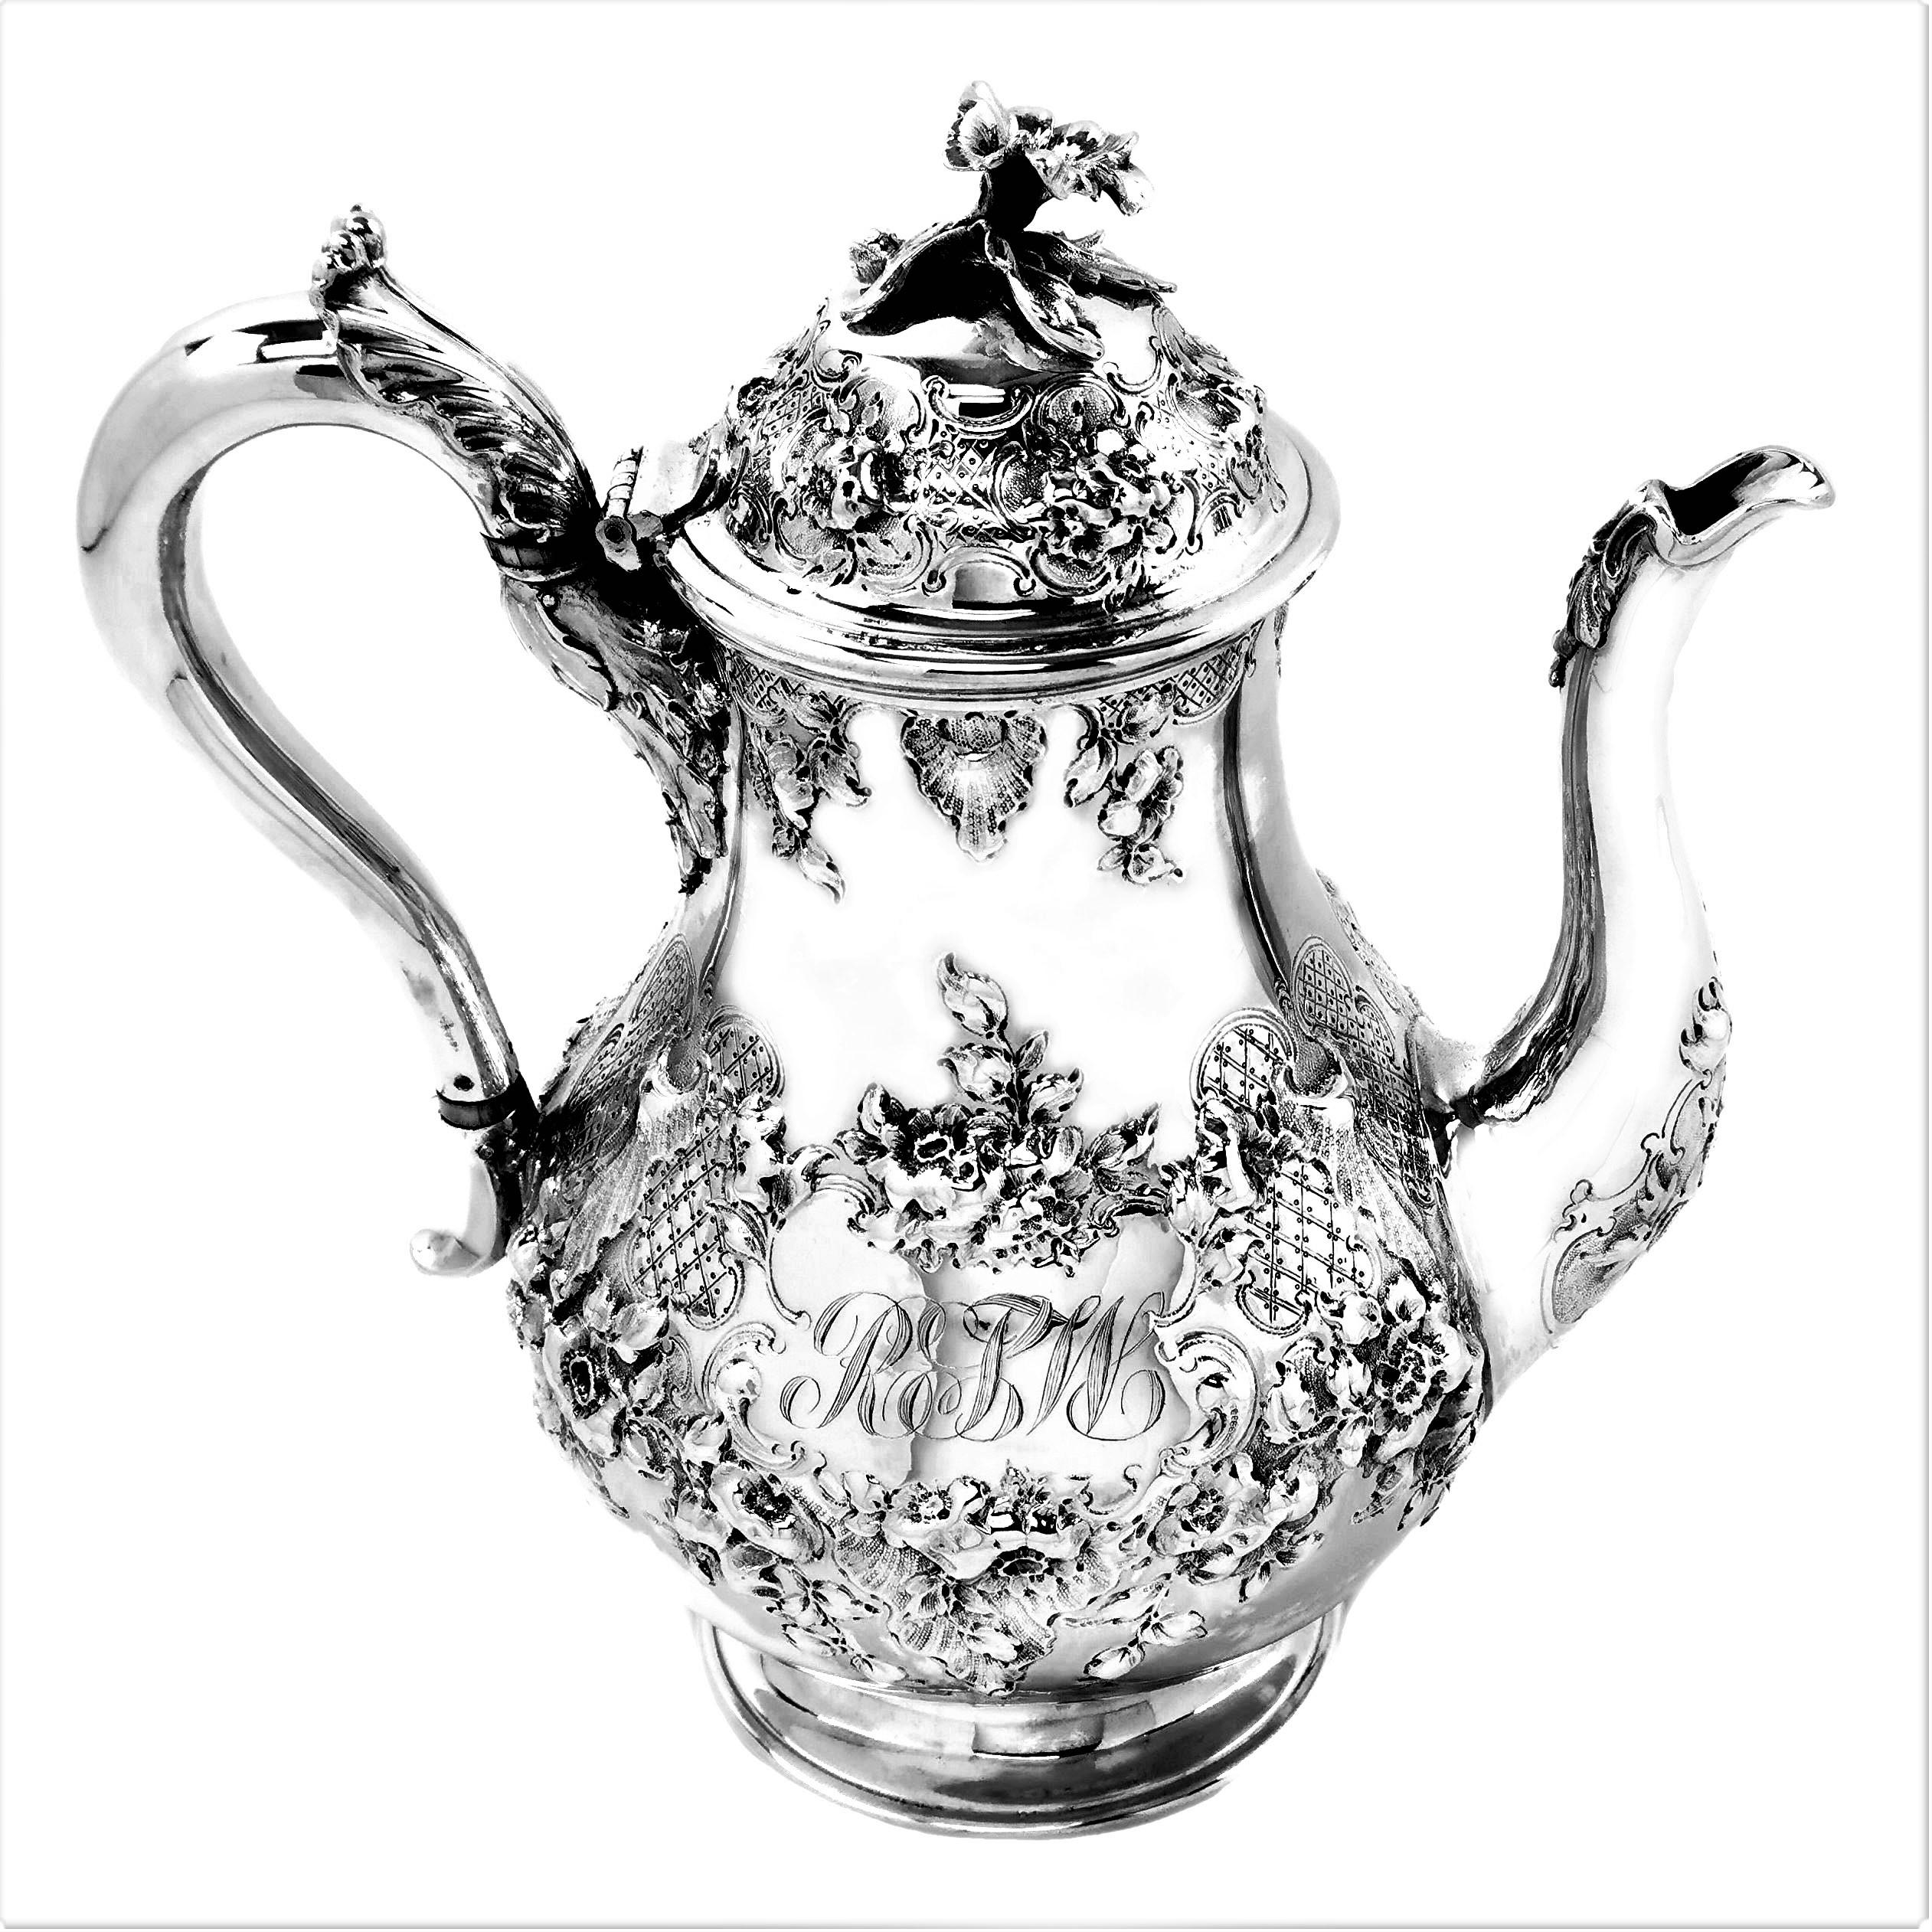 English Antique Victorian Solid Silver Four-Piece Tea and Coffee Set, 1856